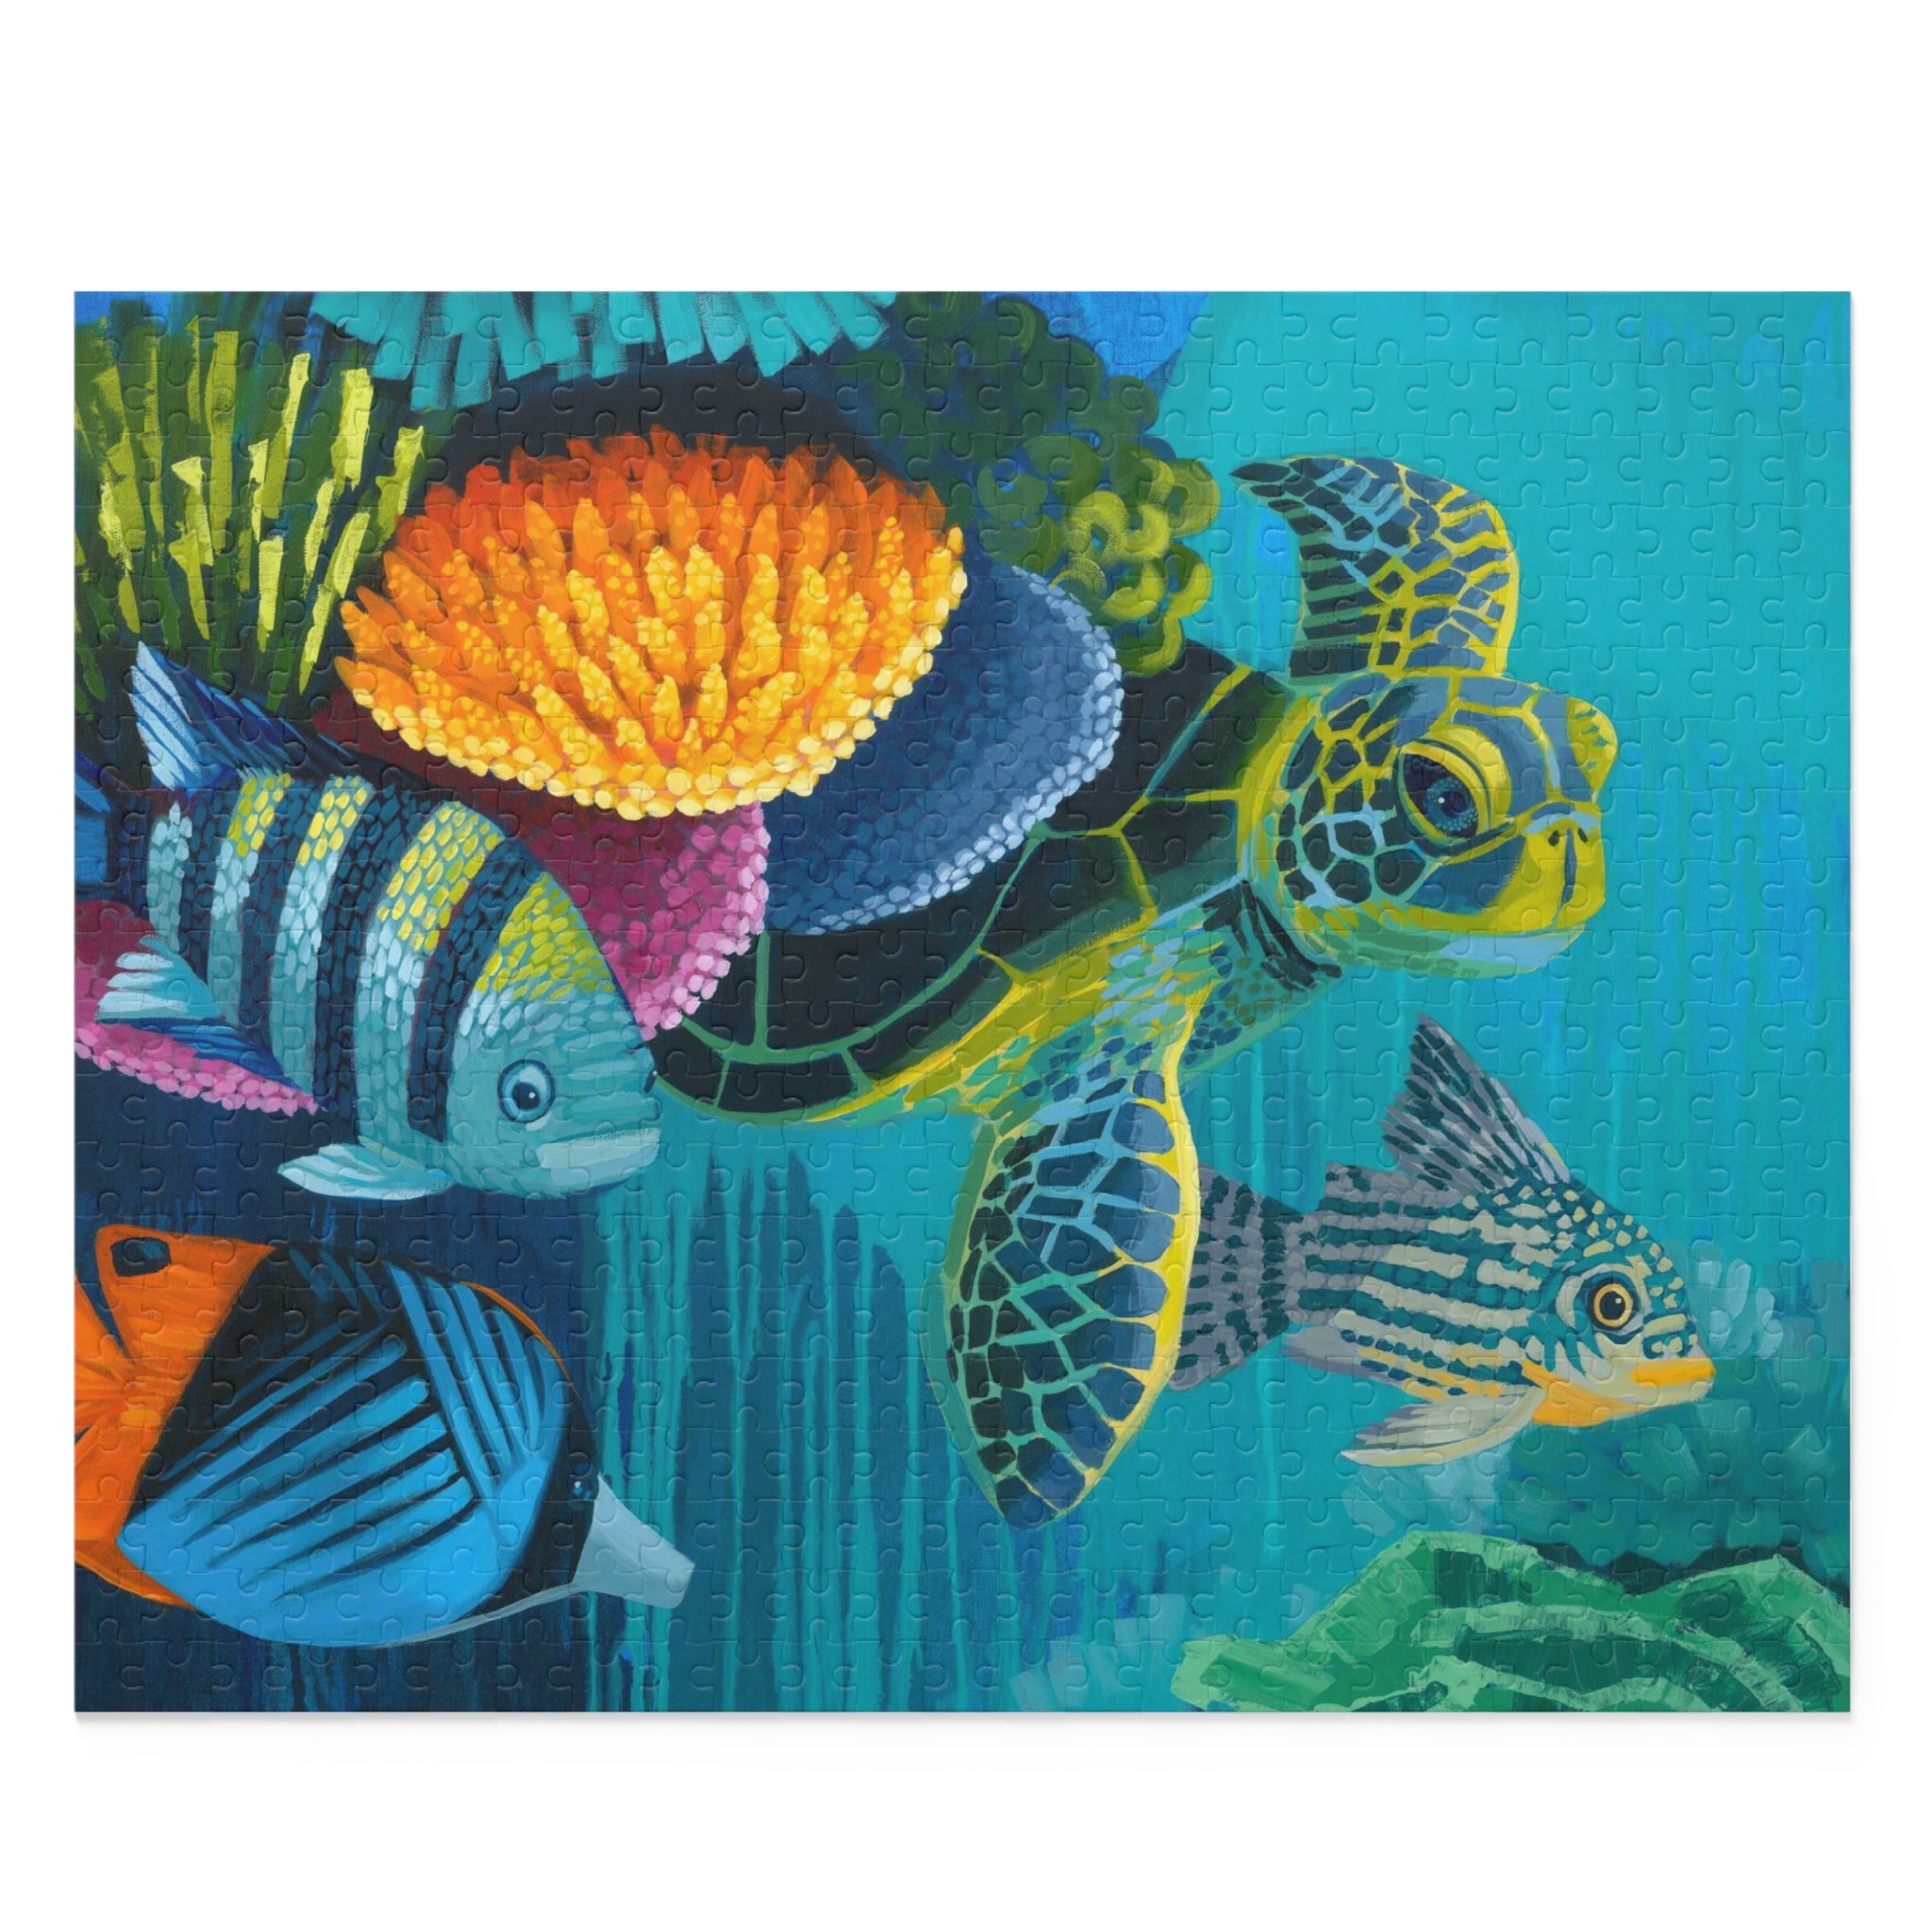 Swimming Starboard Puzzle (500-Piece)